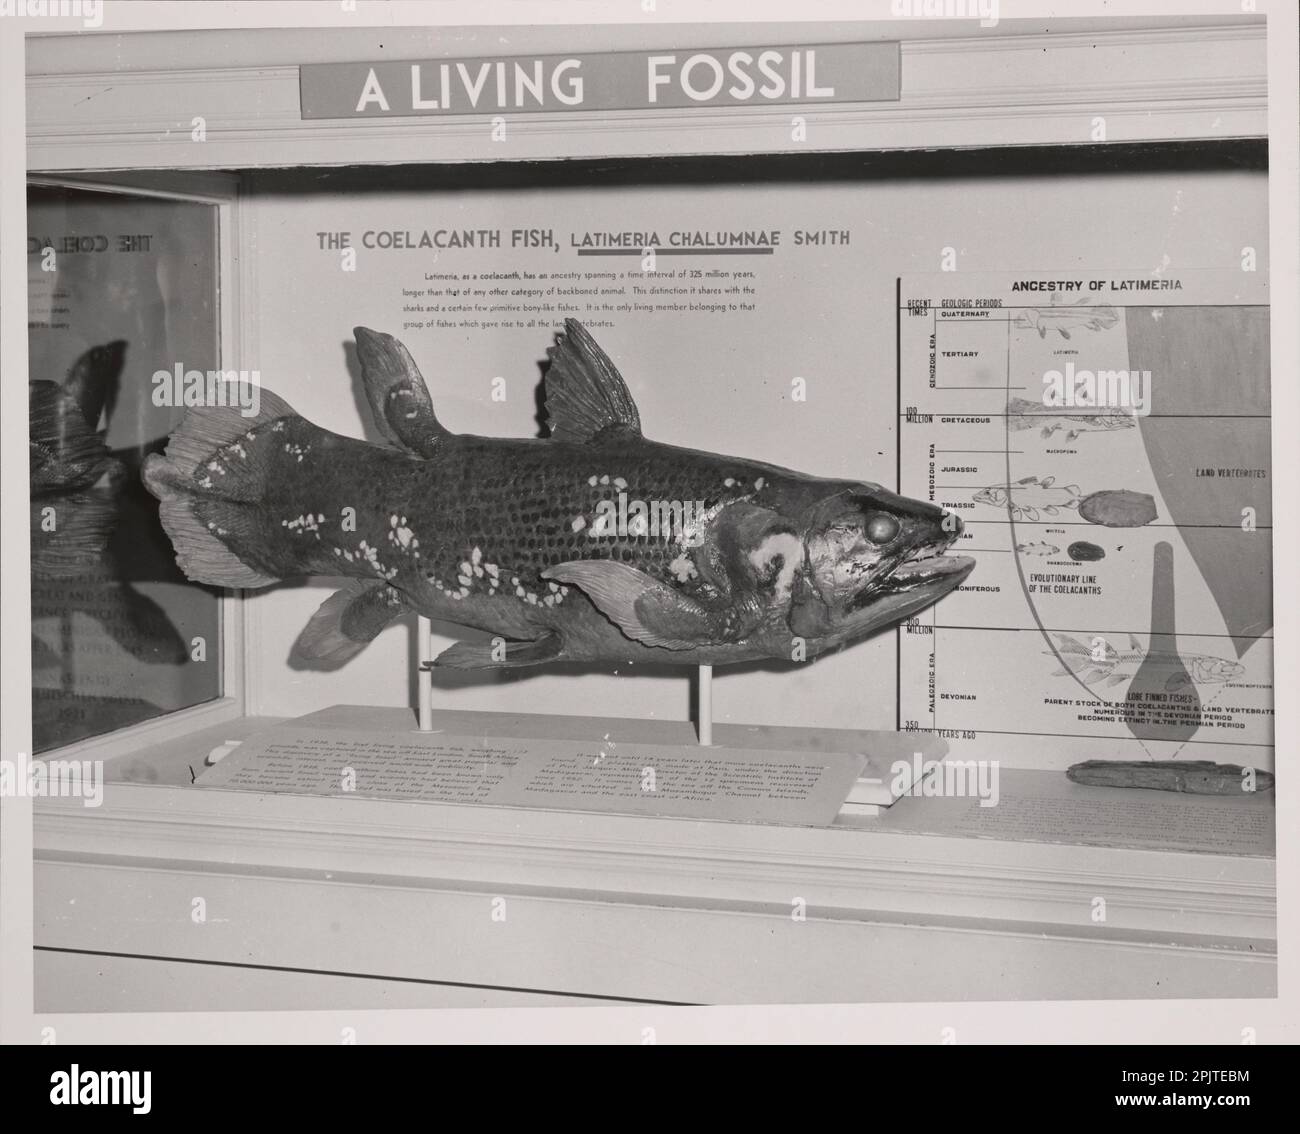 Männlich Coelacanth Fish Living Fossil Display, Museum of Natural History, Washington, DC, USA Stockfoto